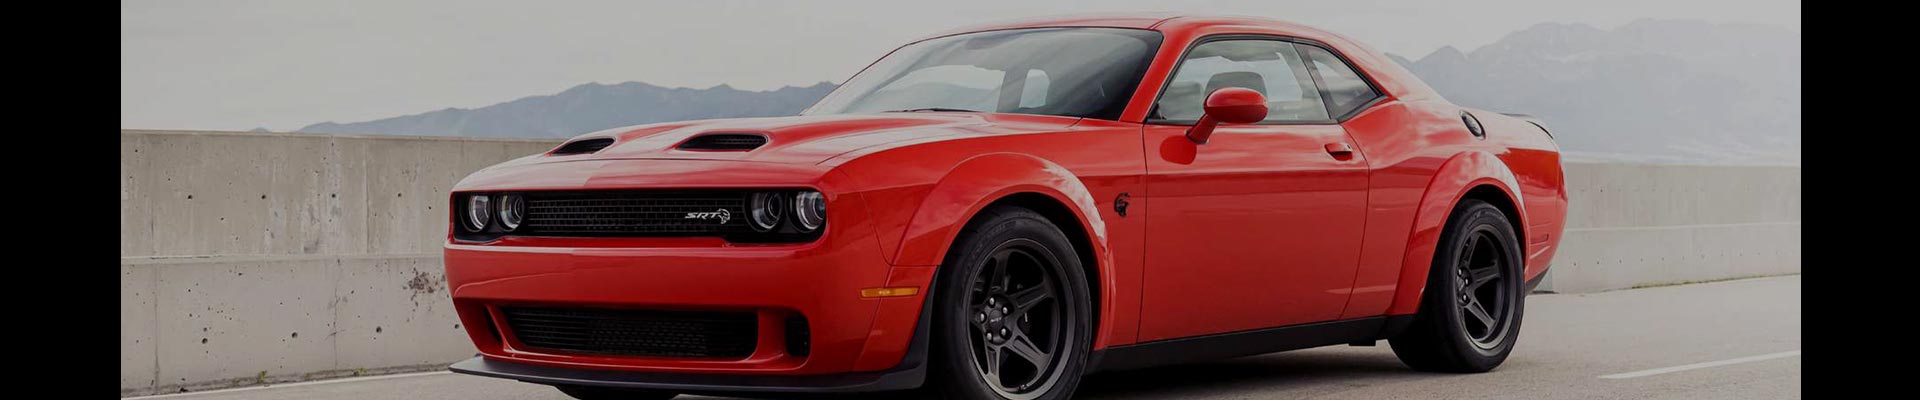 Shop Replacement and OEM 2011 Dodge Challenger Parts with Discounted Price on the Net